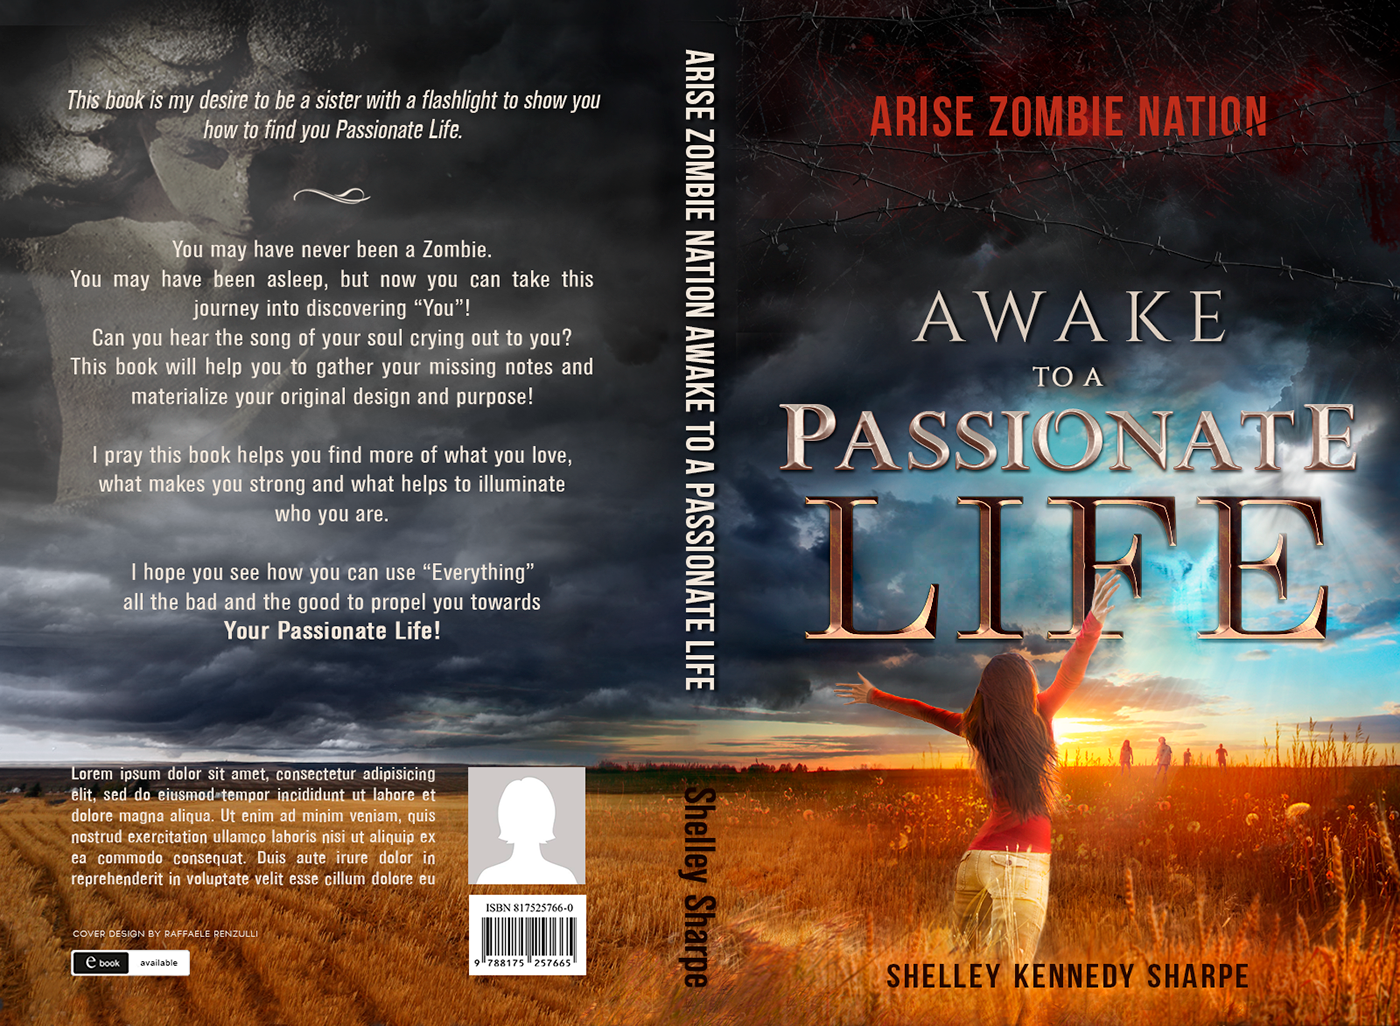 book cover awake passionate life zombie nation Shelley Sharpe life coach new life reborn light graphic design  book graphic composition